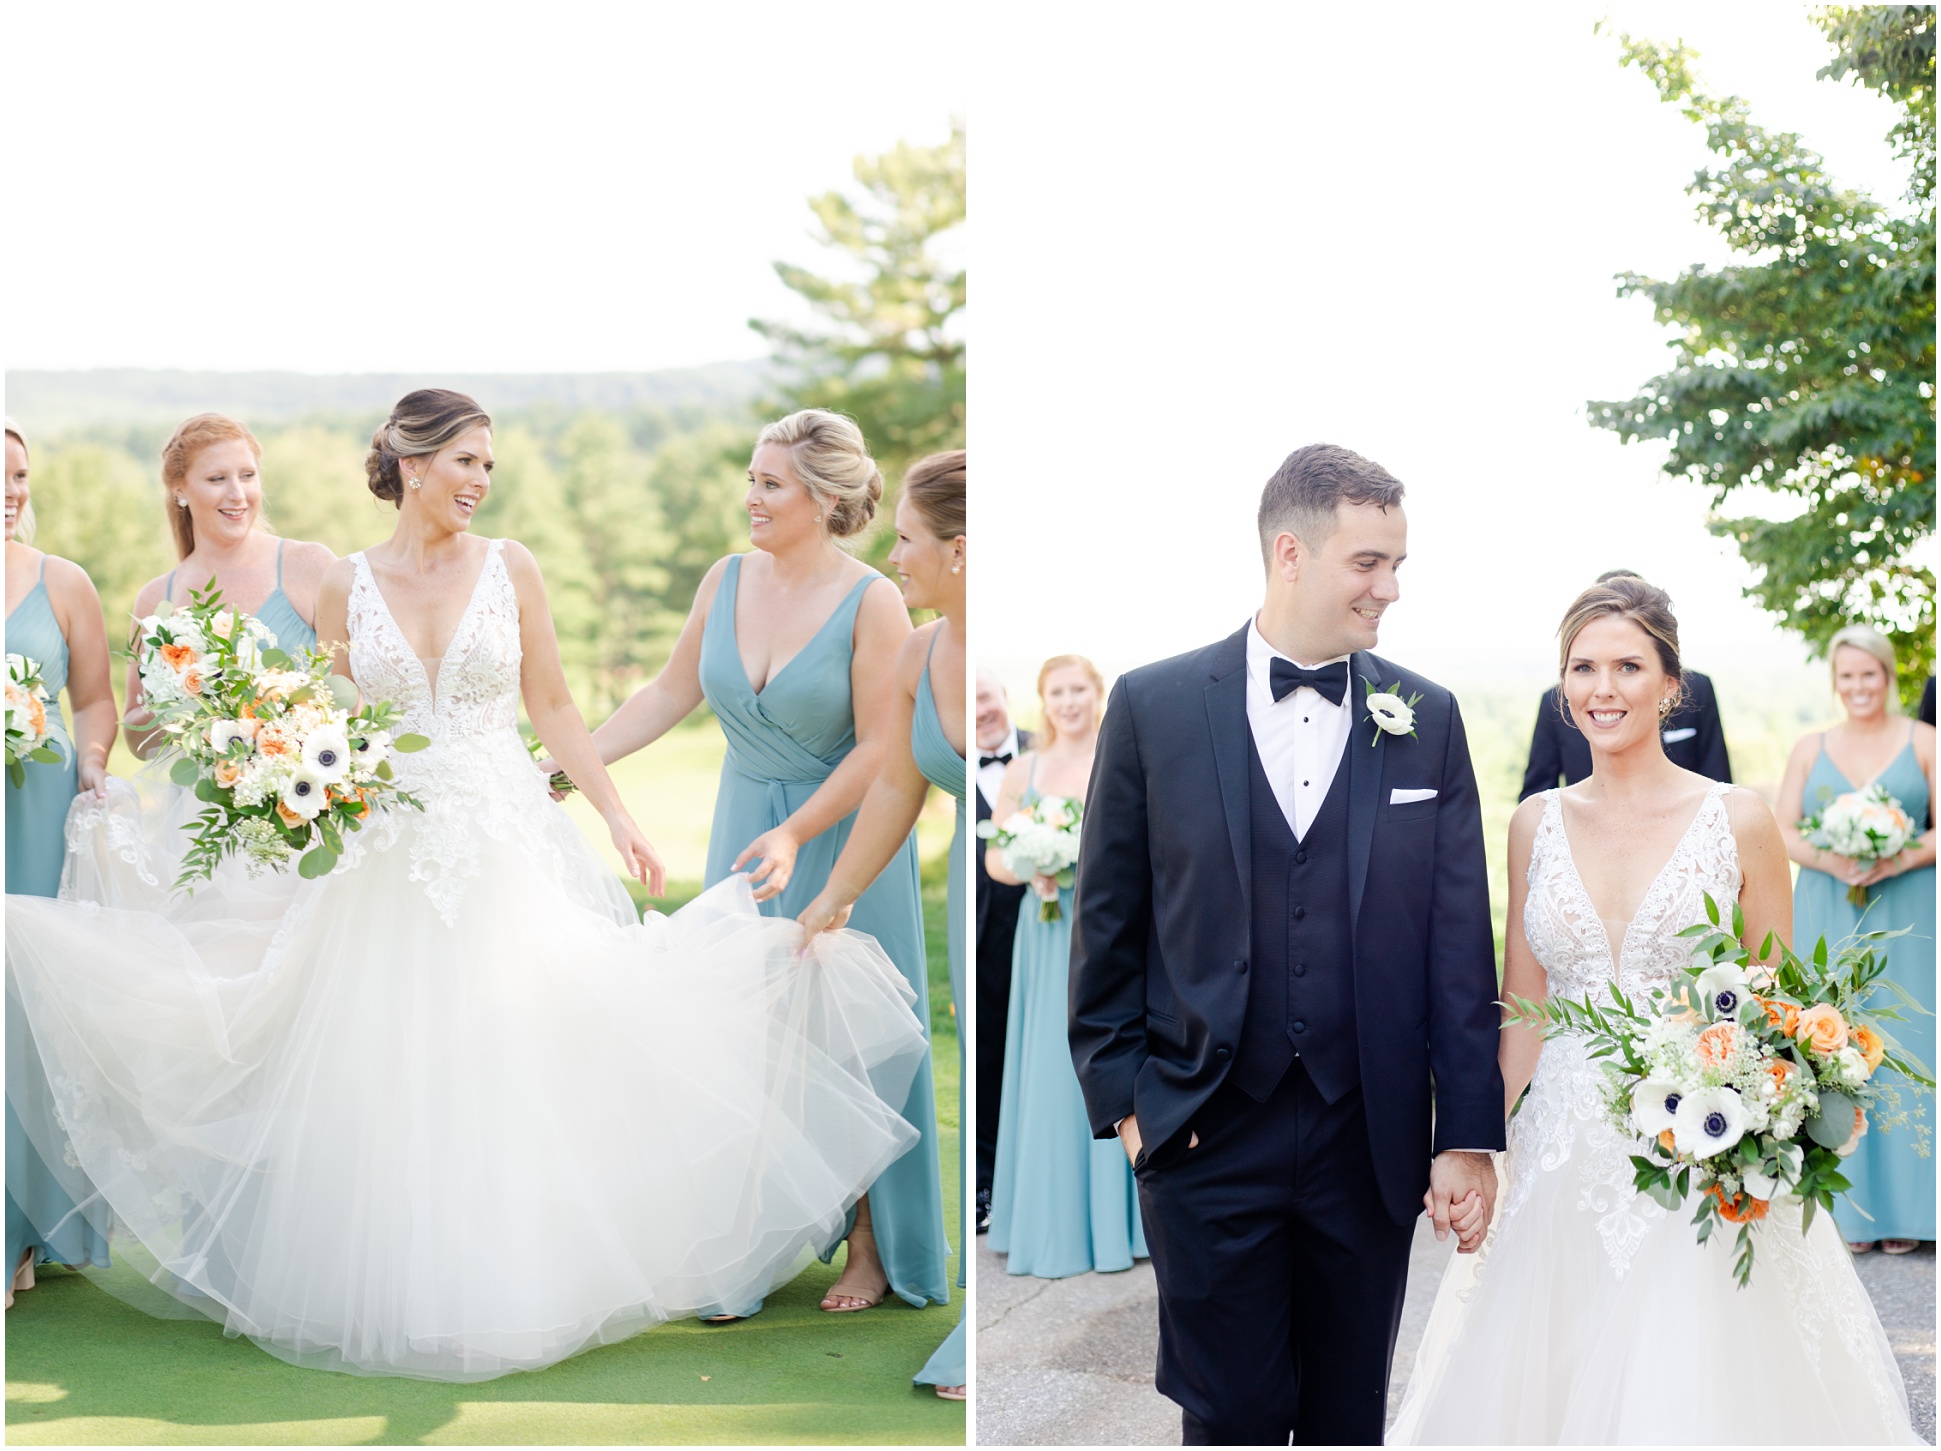 Left: Bride with her bridesmaids, Right: Bride and groom walking in front of the bridal party